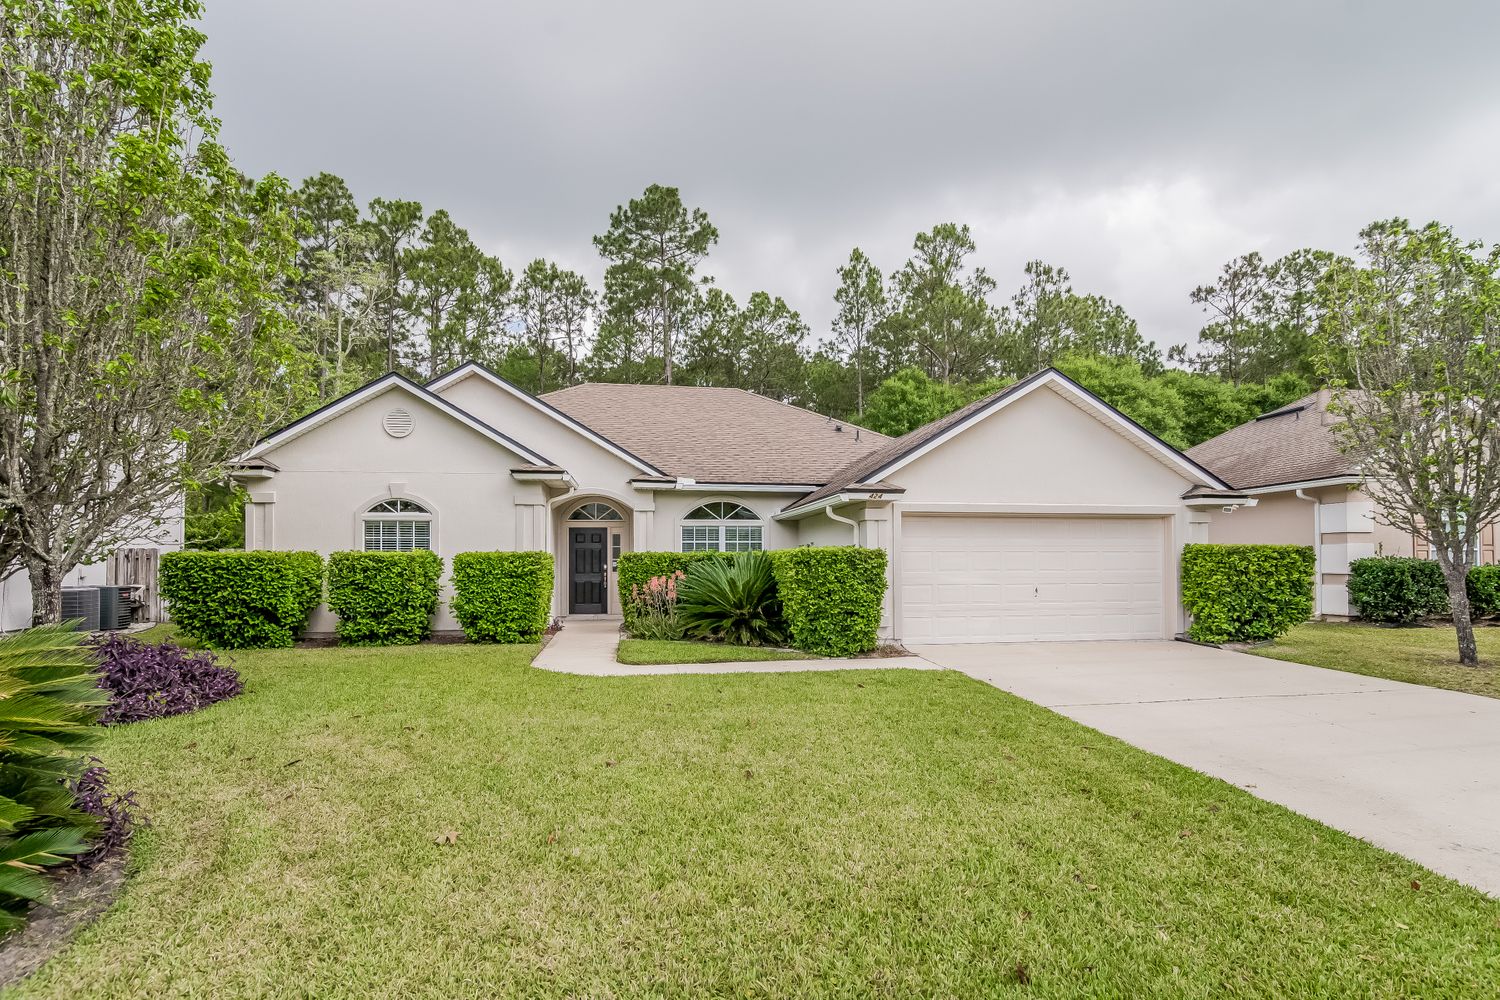 Beautiful home with large front yard at Invitation Homes Jacksonville.